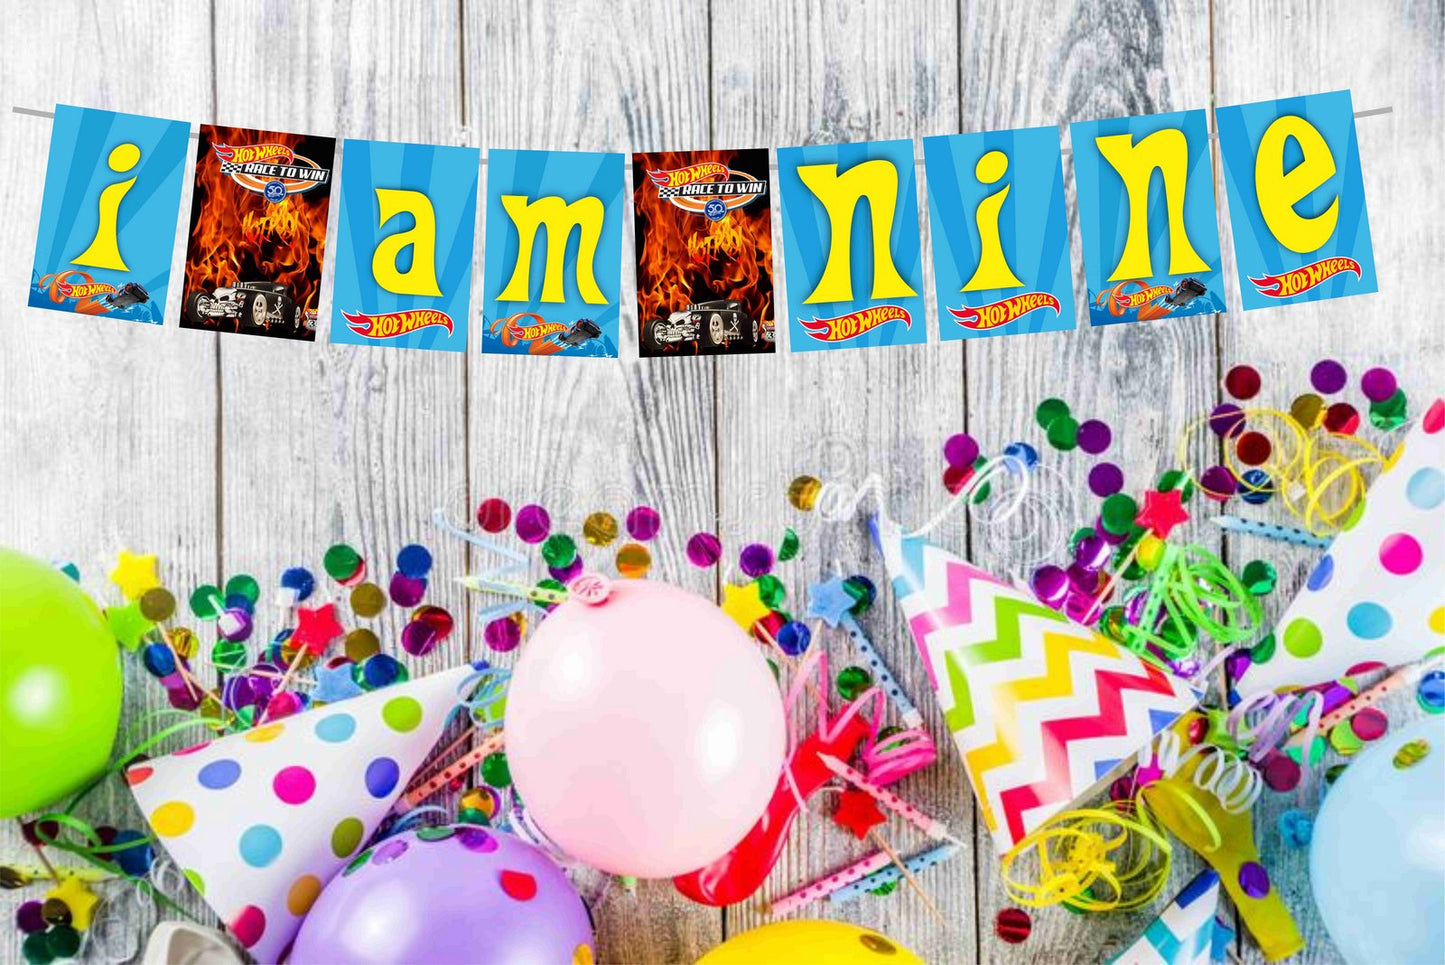 Hot Racing Wheels Theme I Am Nine 9th Birthday Banner for Photo Shoot Backdrop and Theme Party